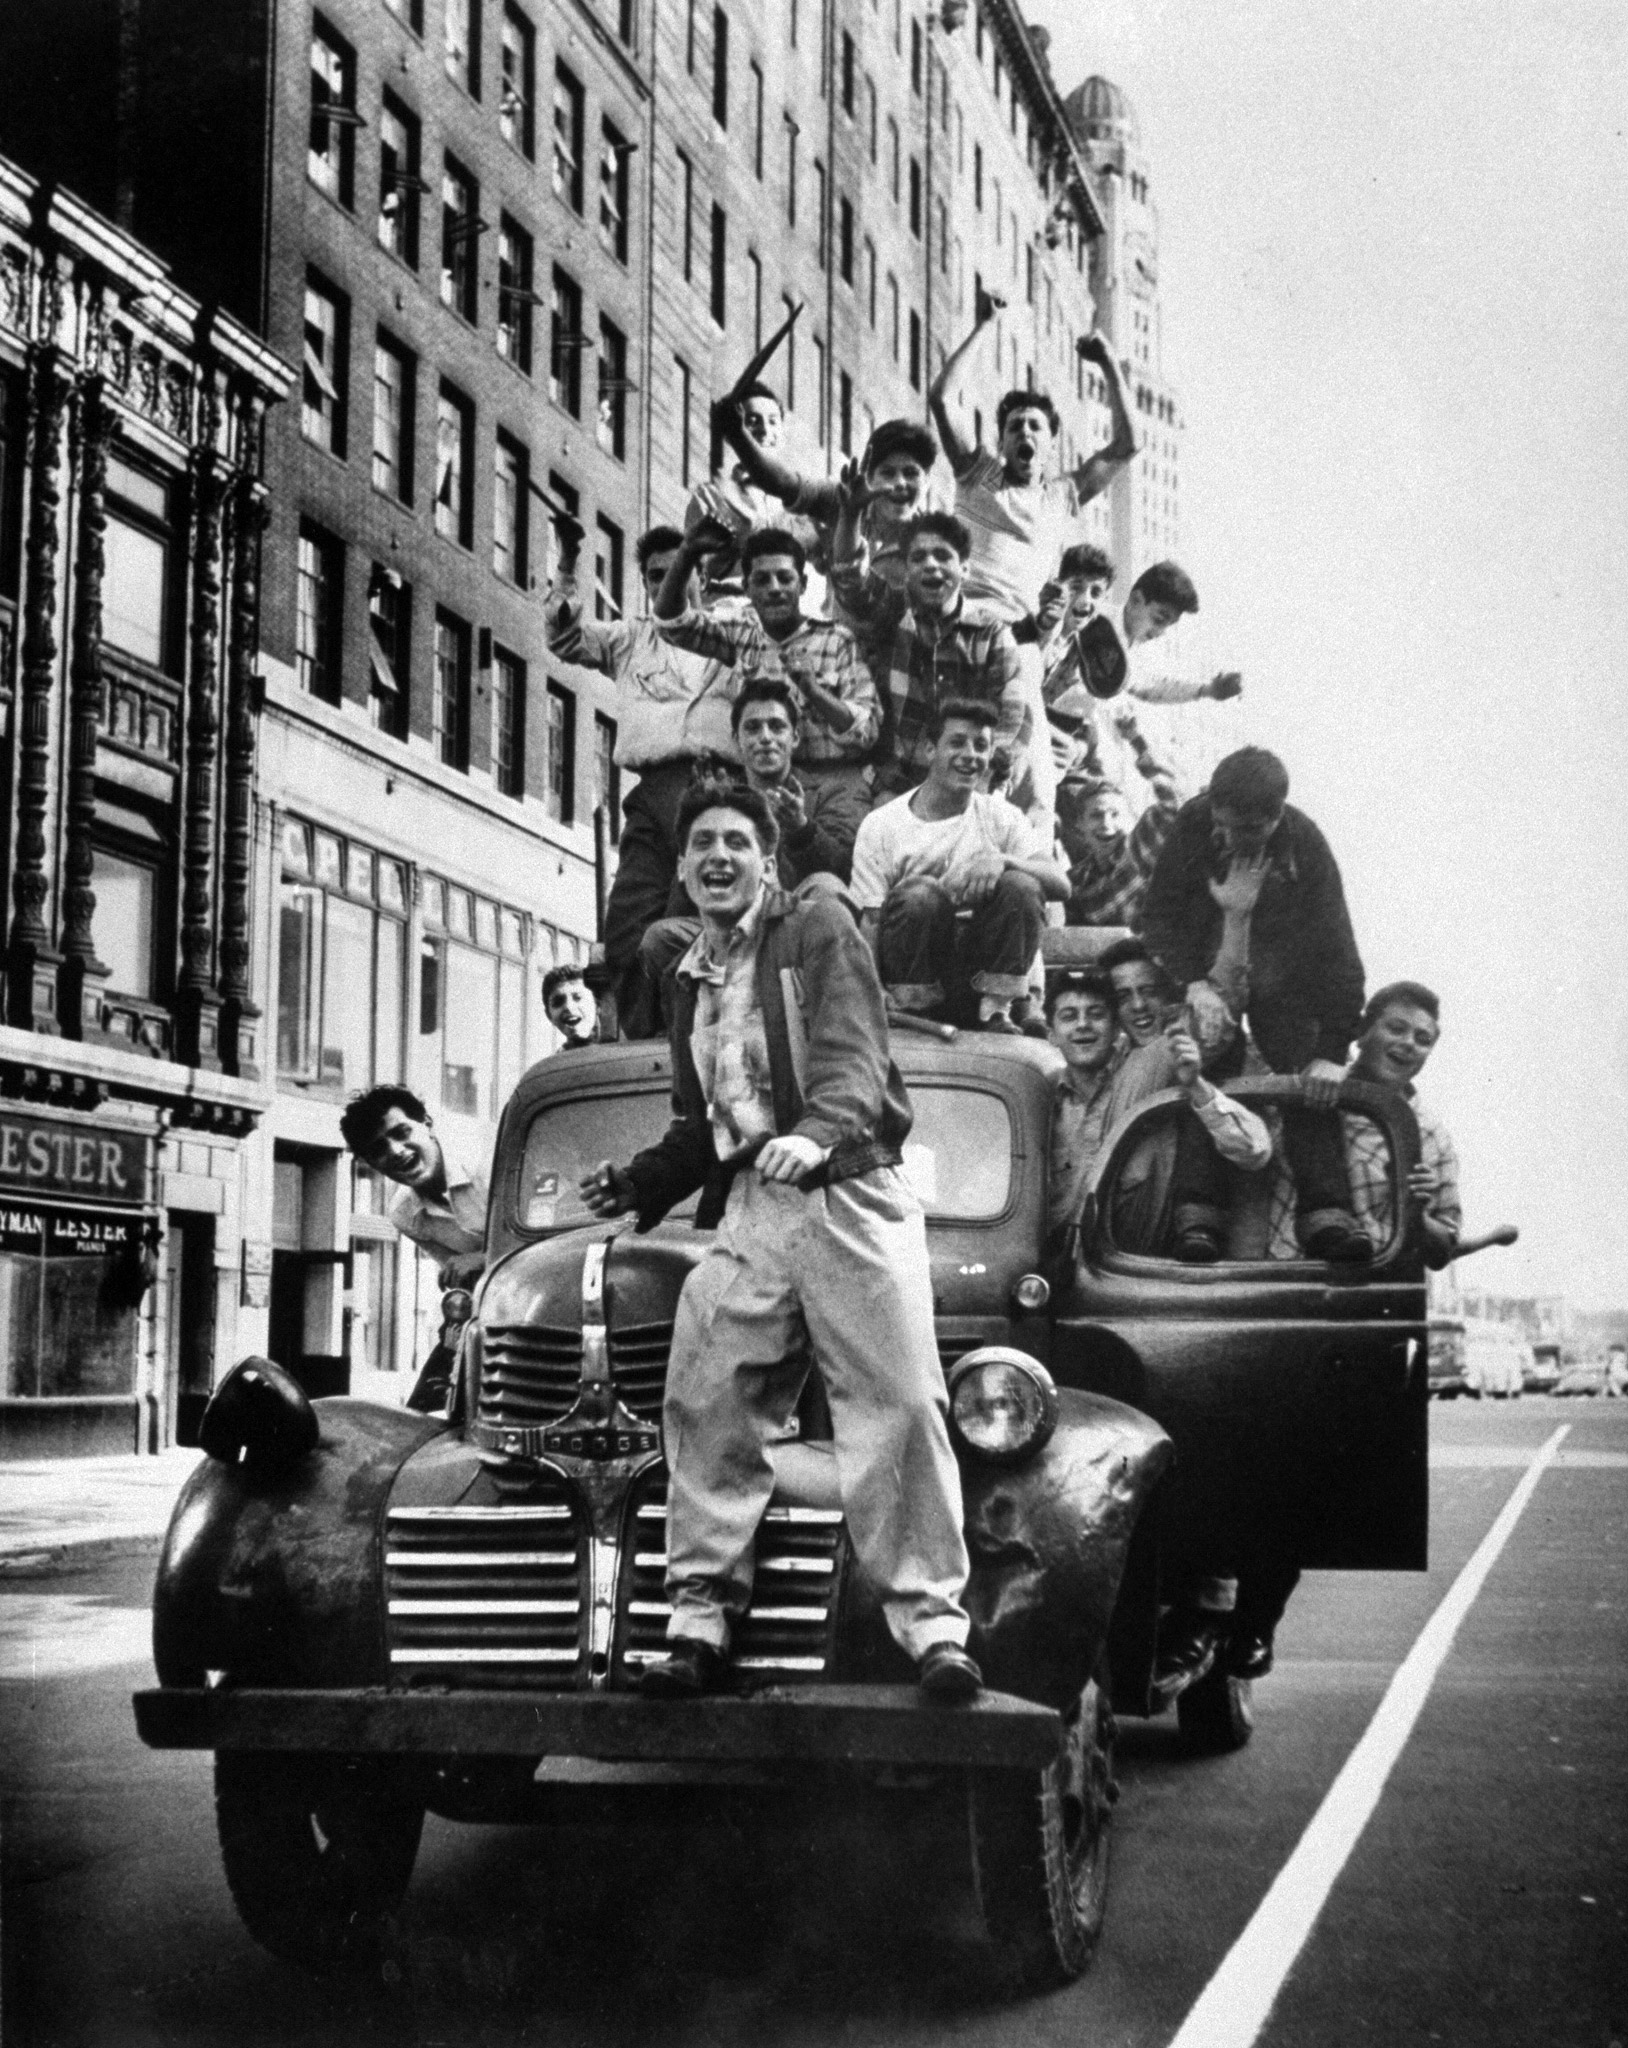 Fans celebrating Dodgers' World Series victory, 1955, Brooklyn.